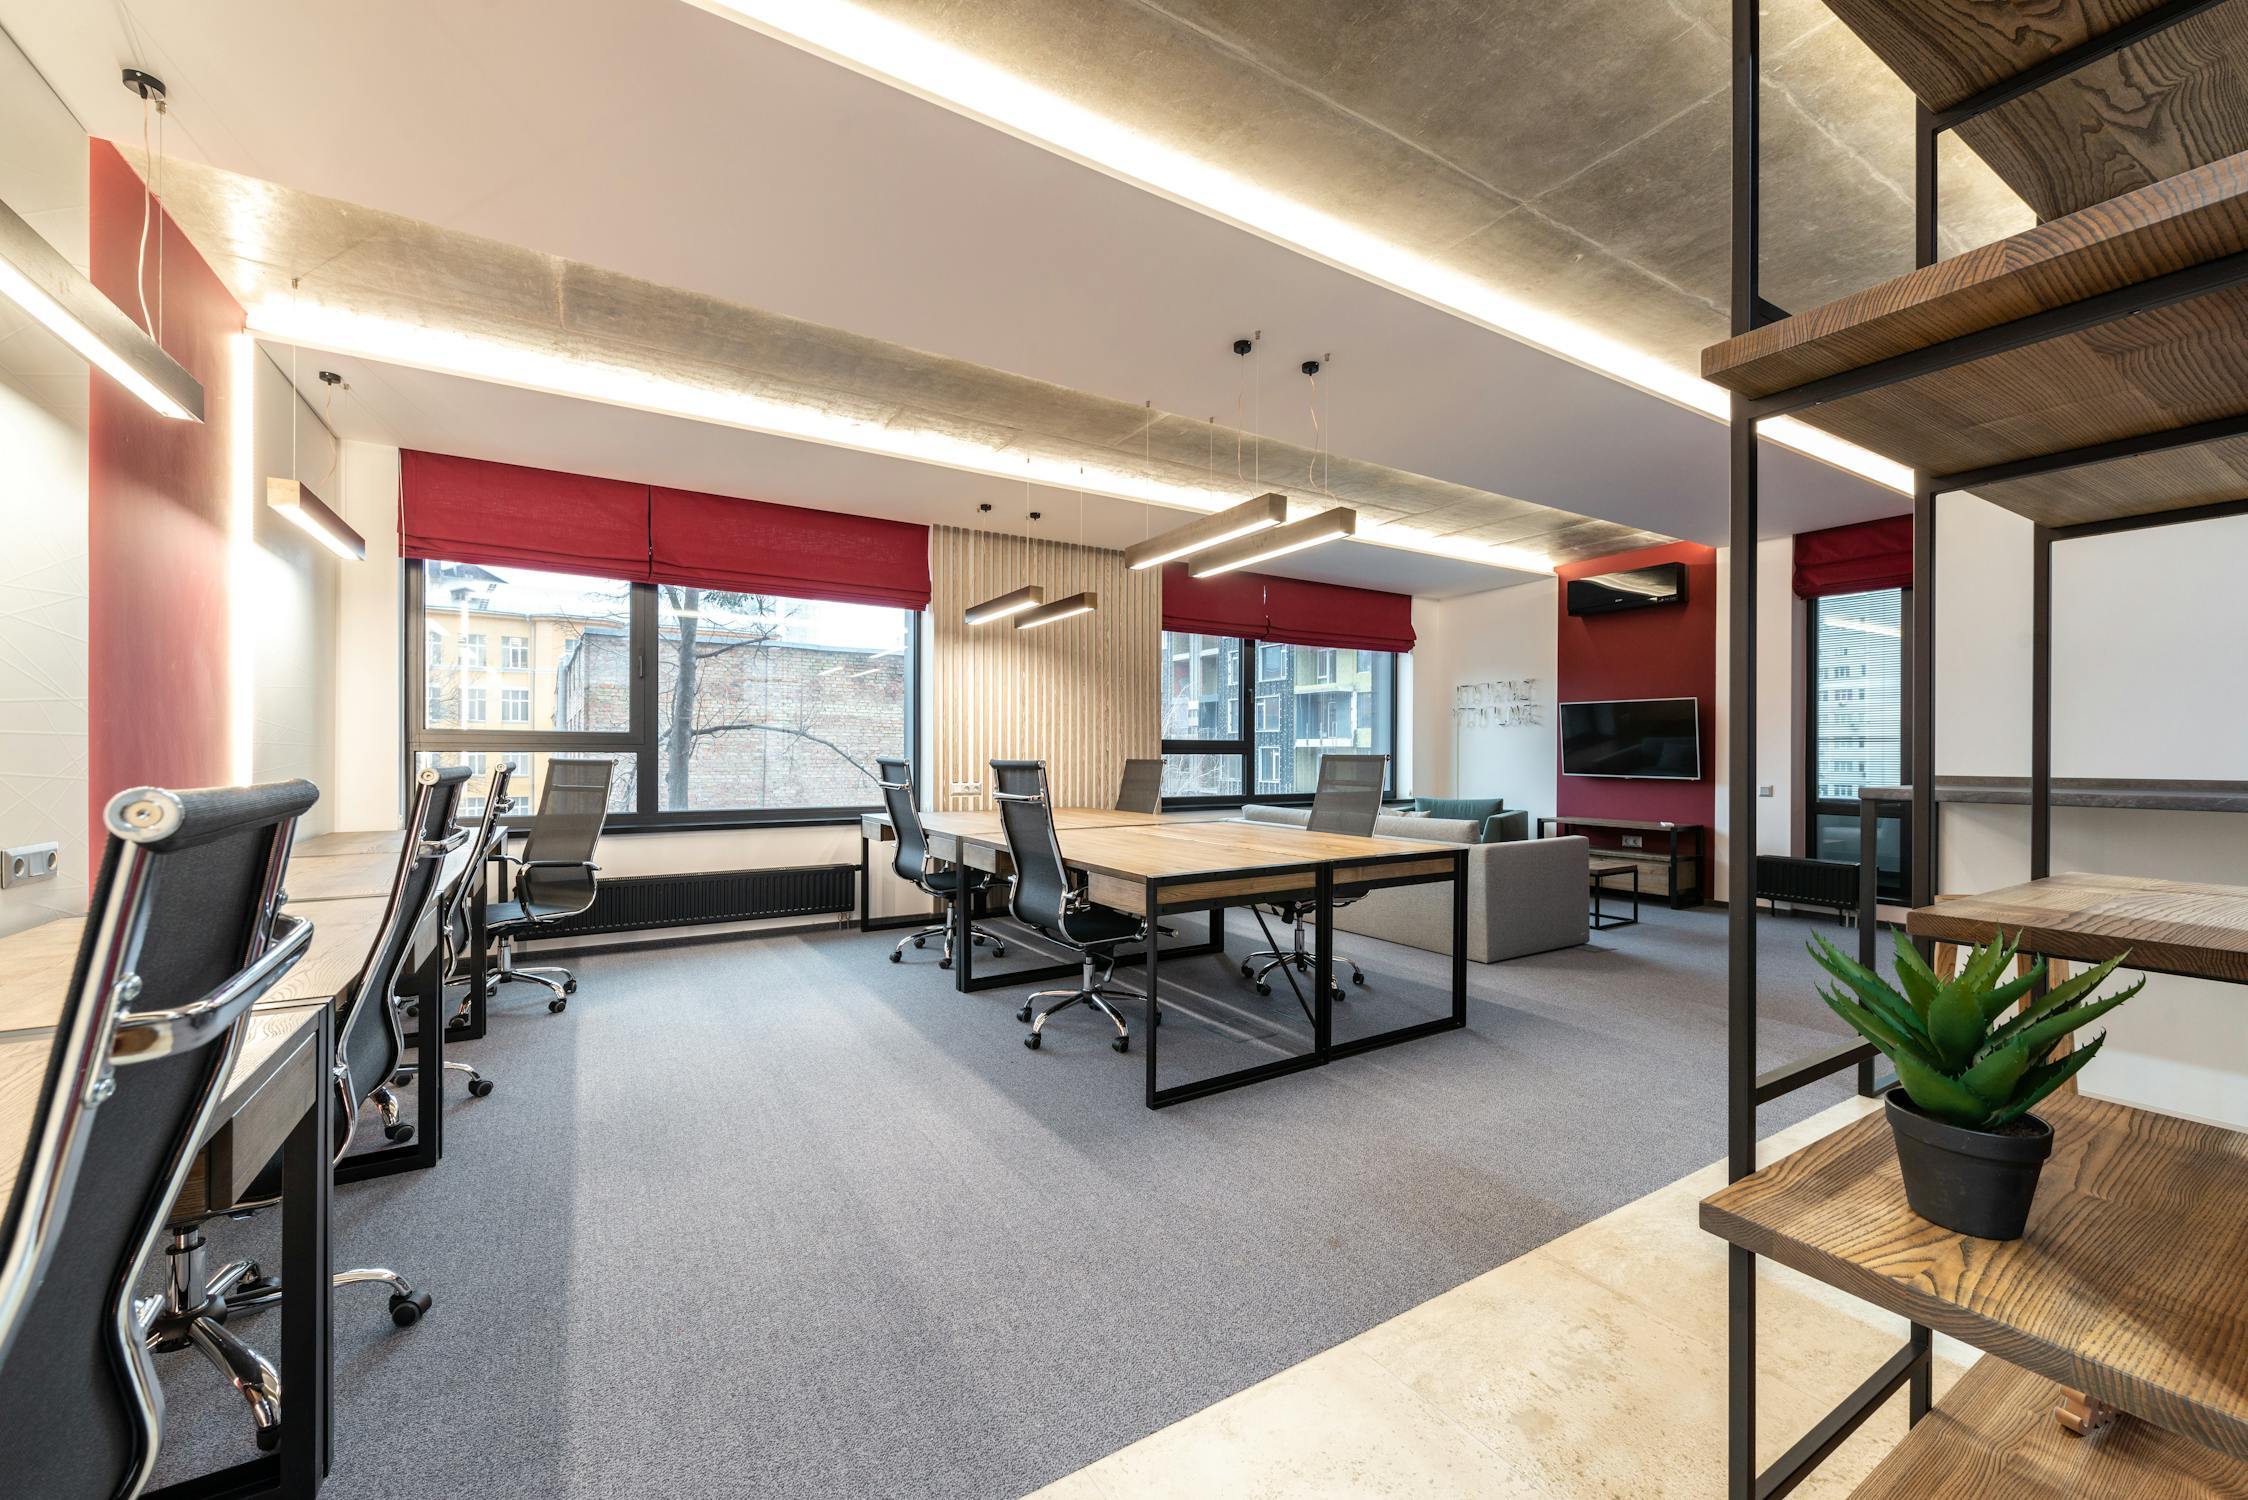 Modular Office Furniture: All You Need To Know